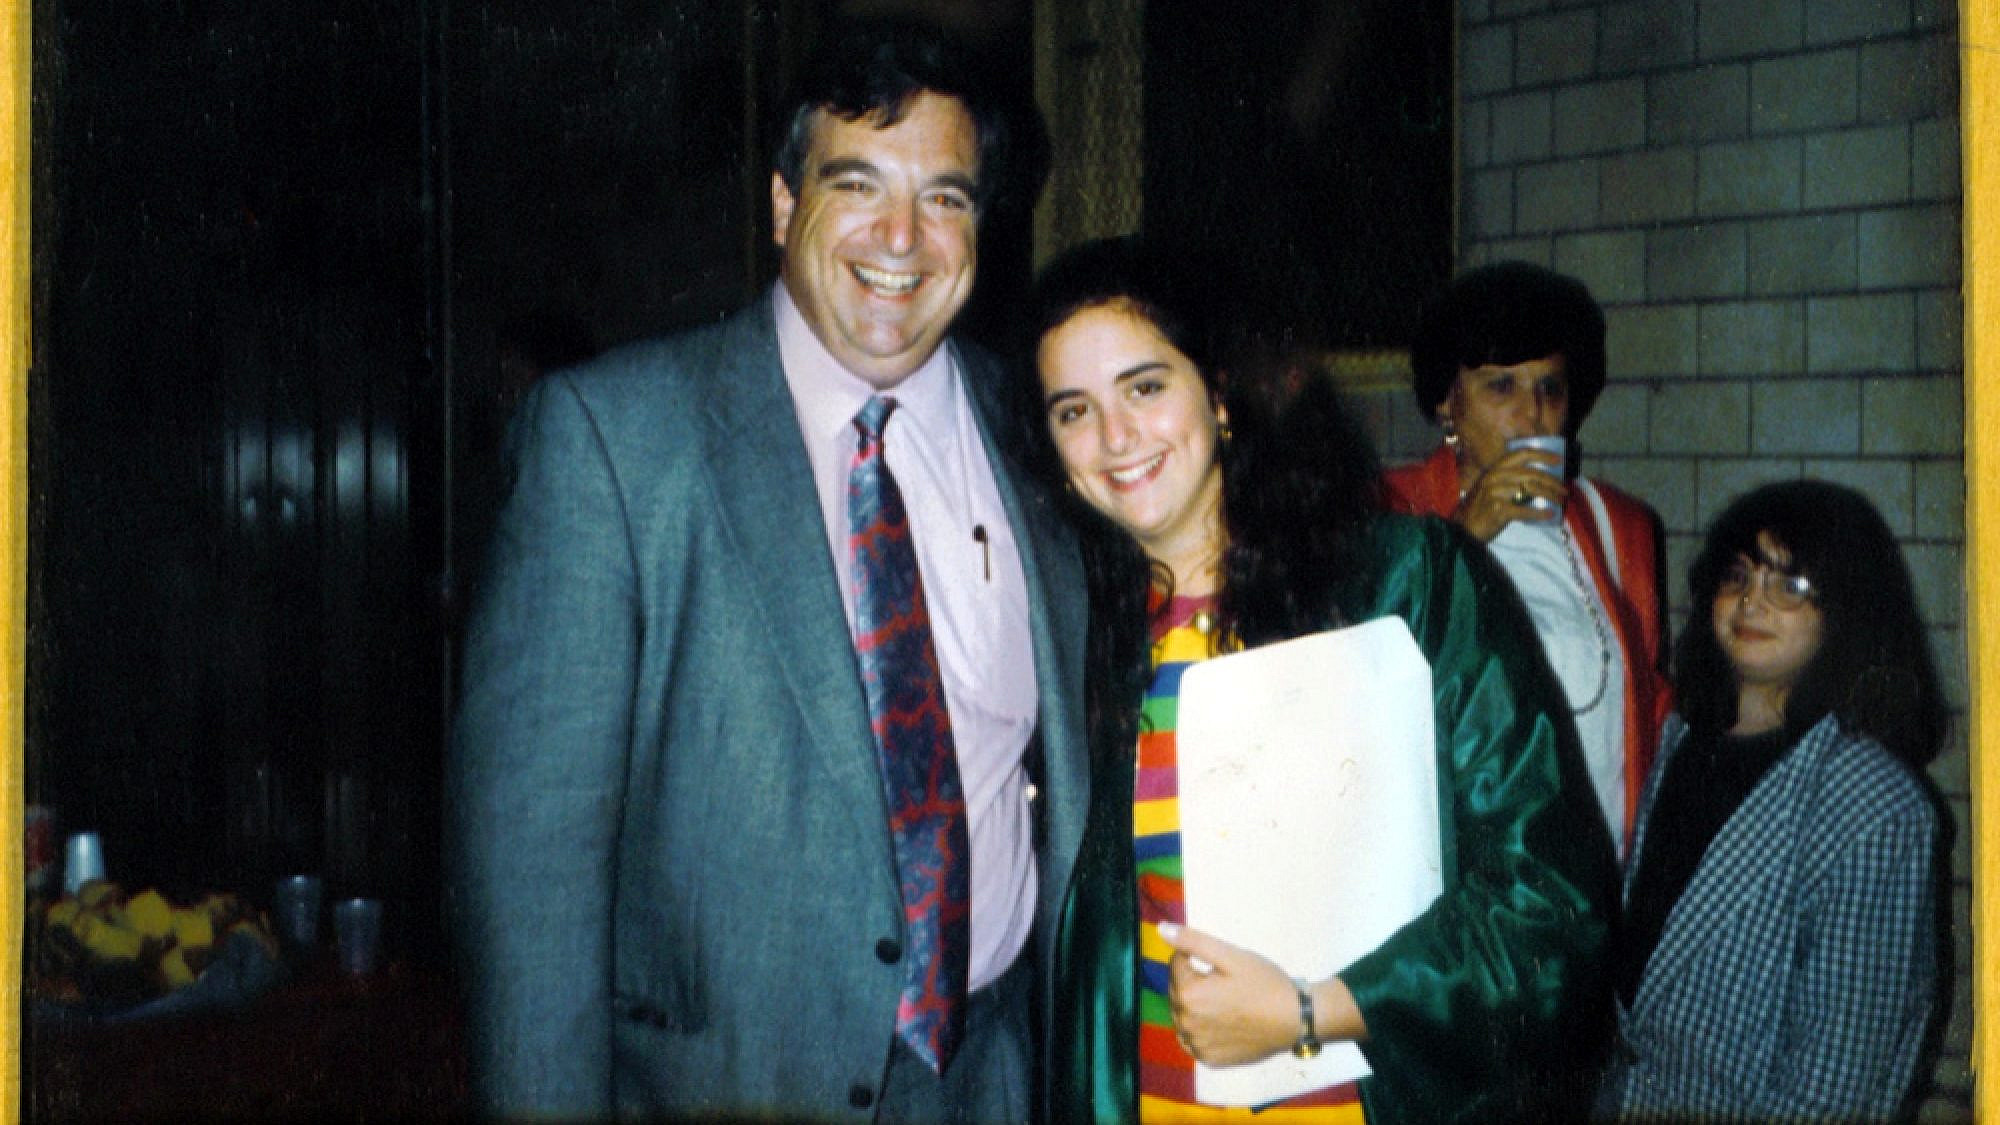 The last photo taken of Stephen M. Flatow with his daughter, Alisa, who was killed in April of 1995 in a terror attack in Israel along with seven others. Credit: Courtesy.